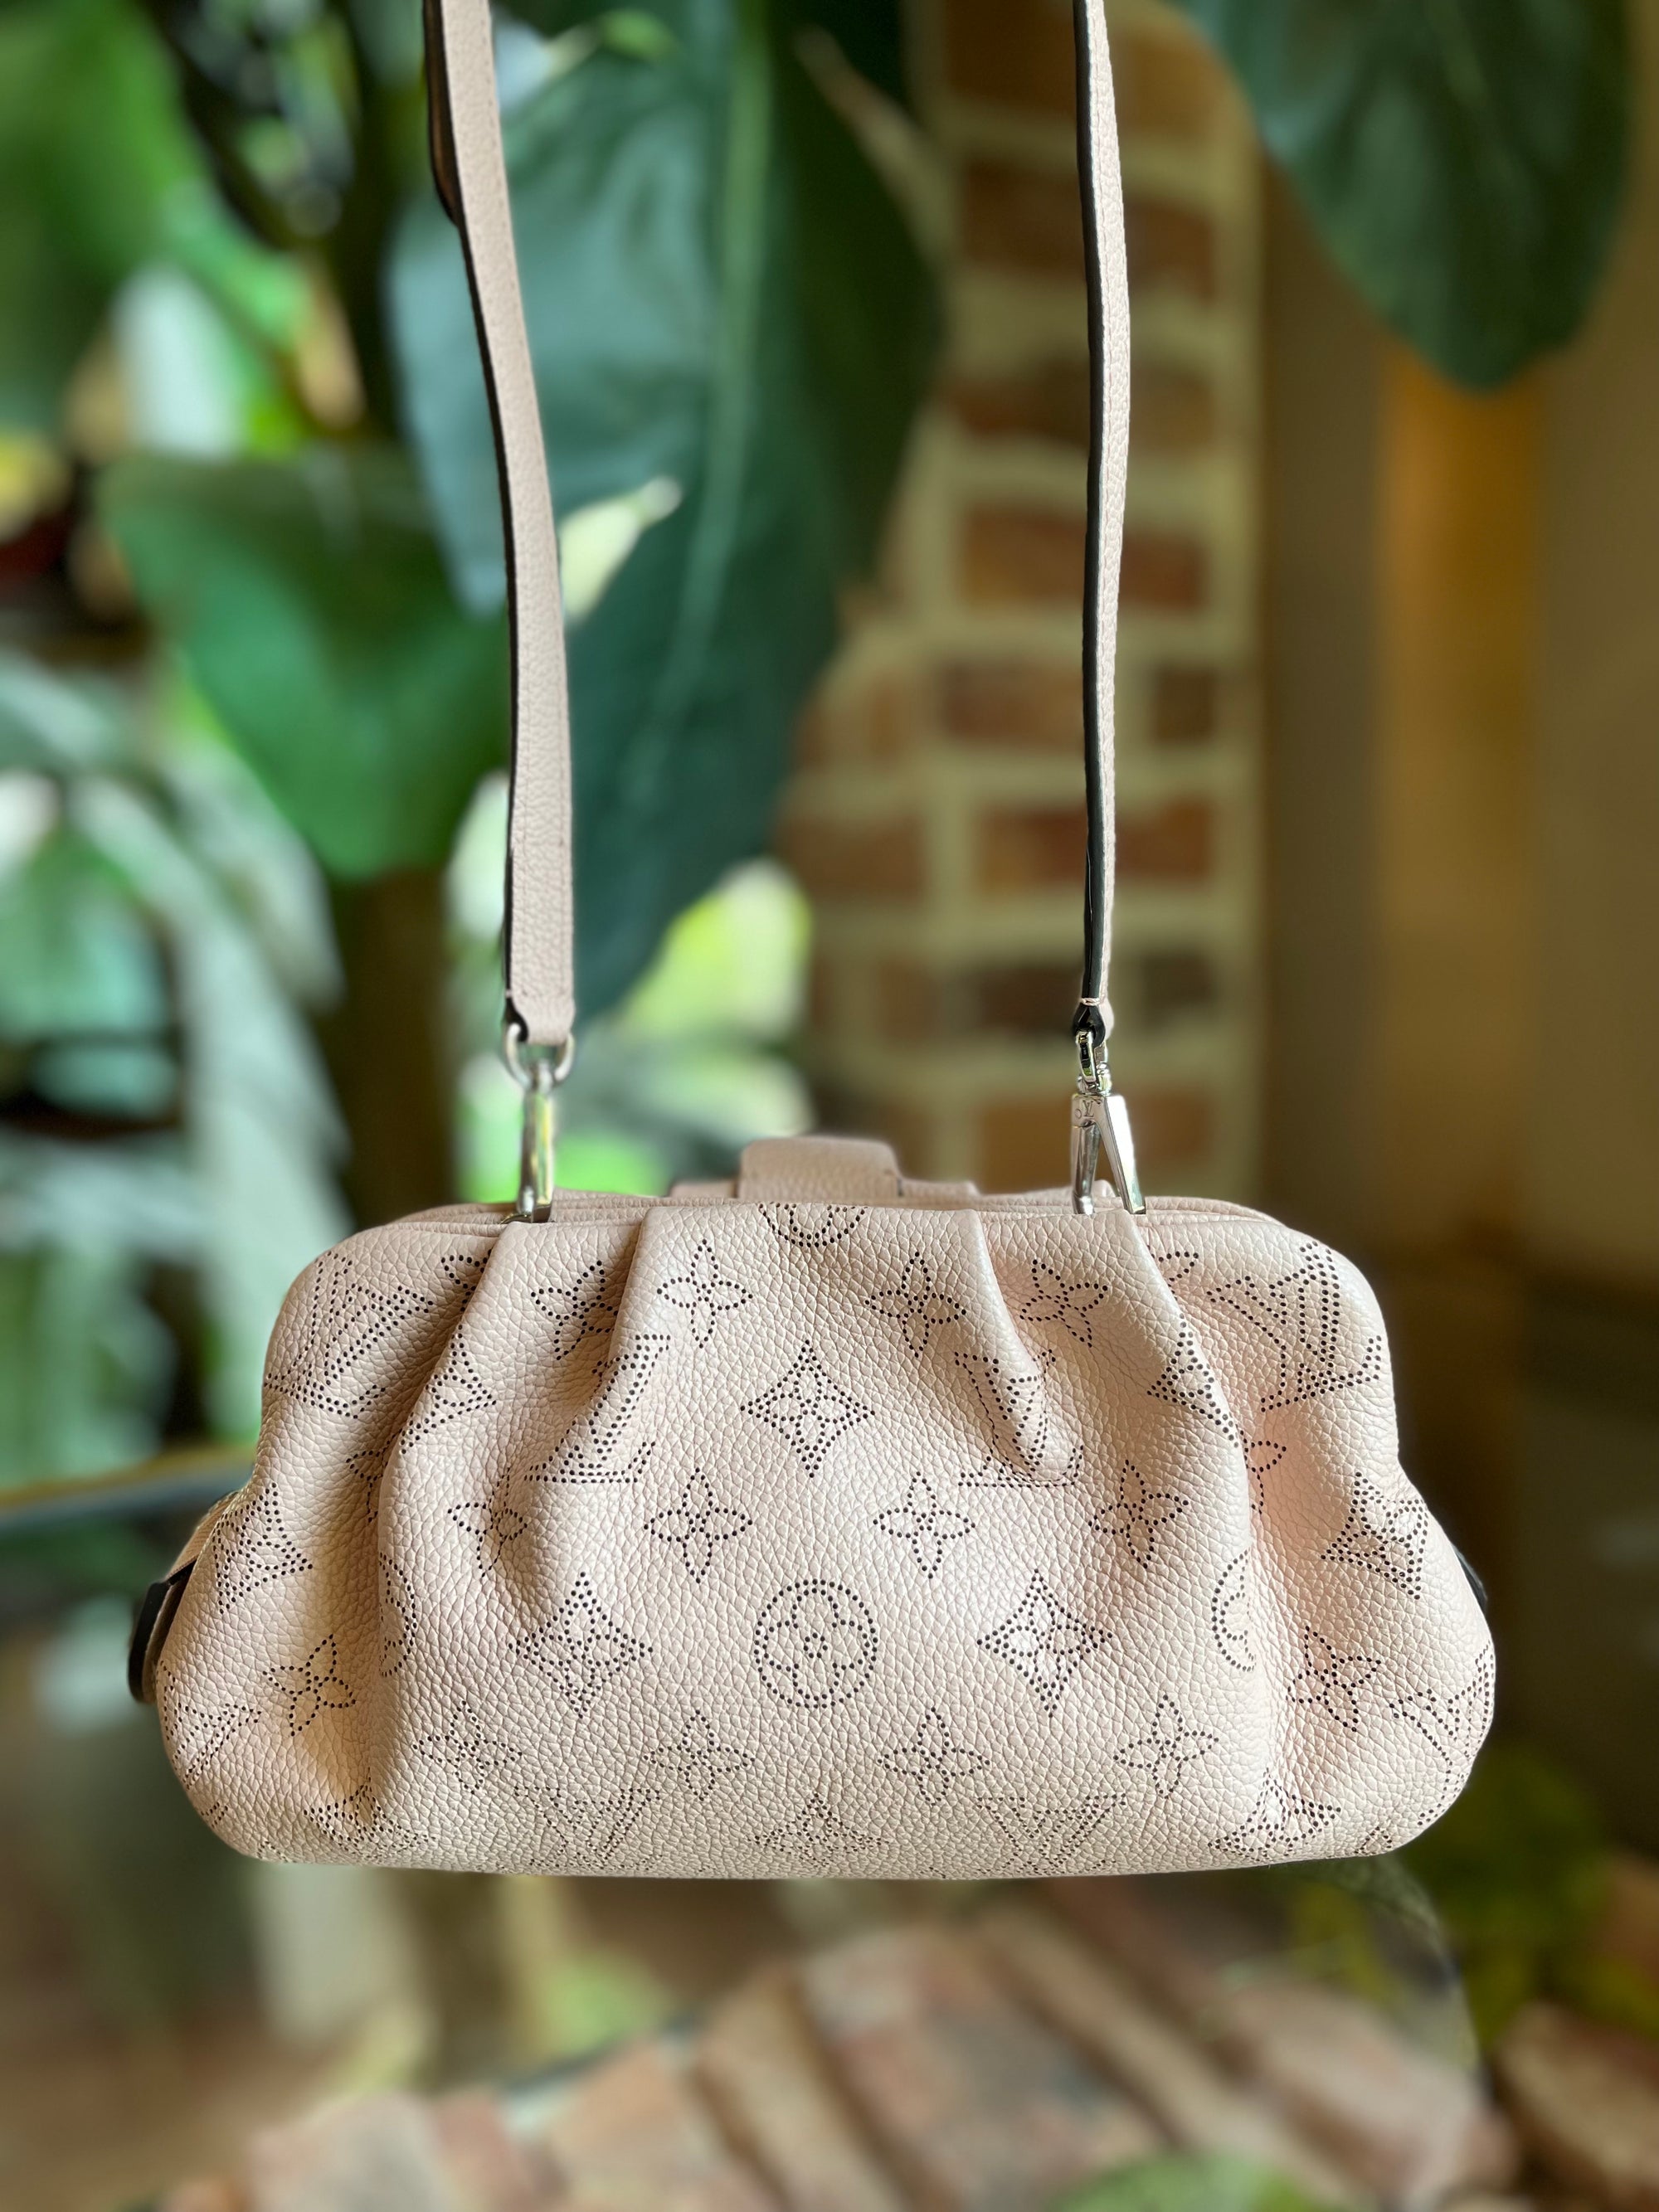 Authentic.Buy.Sell - BRAND NEW Louis Vuitton Neo Noe Monogram Rose Poudre  2020 Comes with: ori receipt 2020, dustbag, box, strap, material card  Price: IDR 27.500.000 NETT exclude ongkir